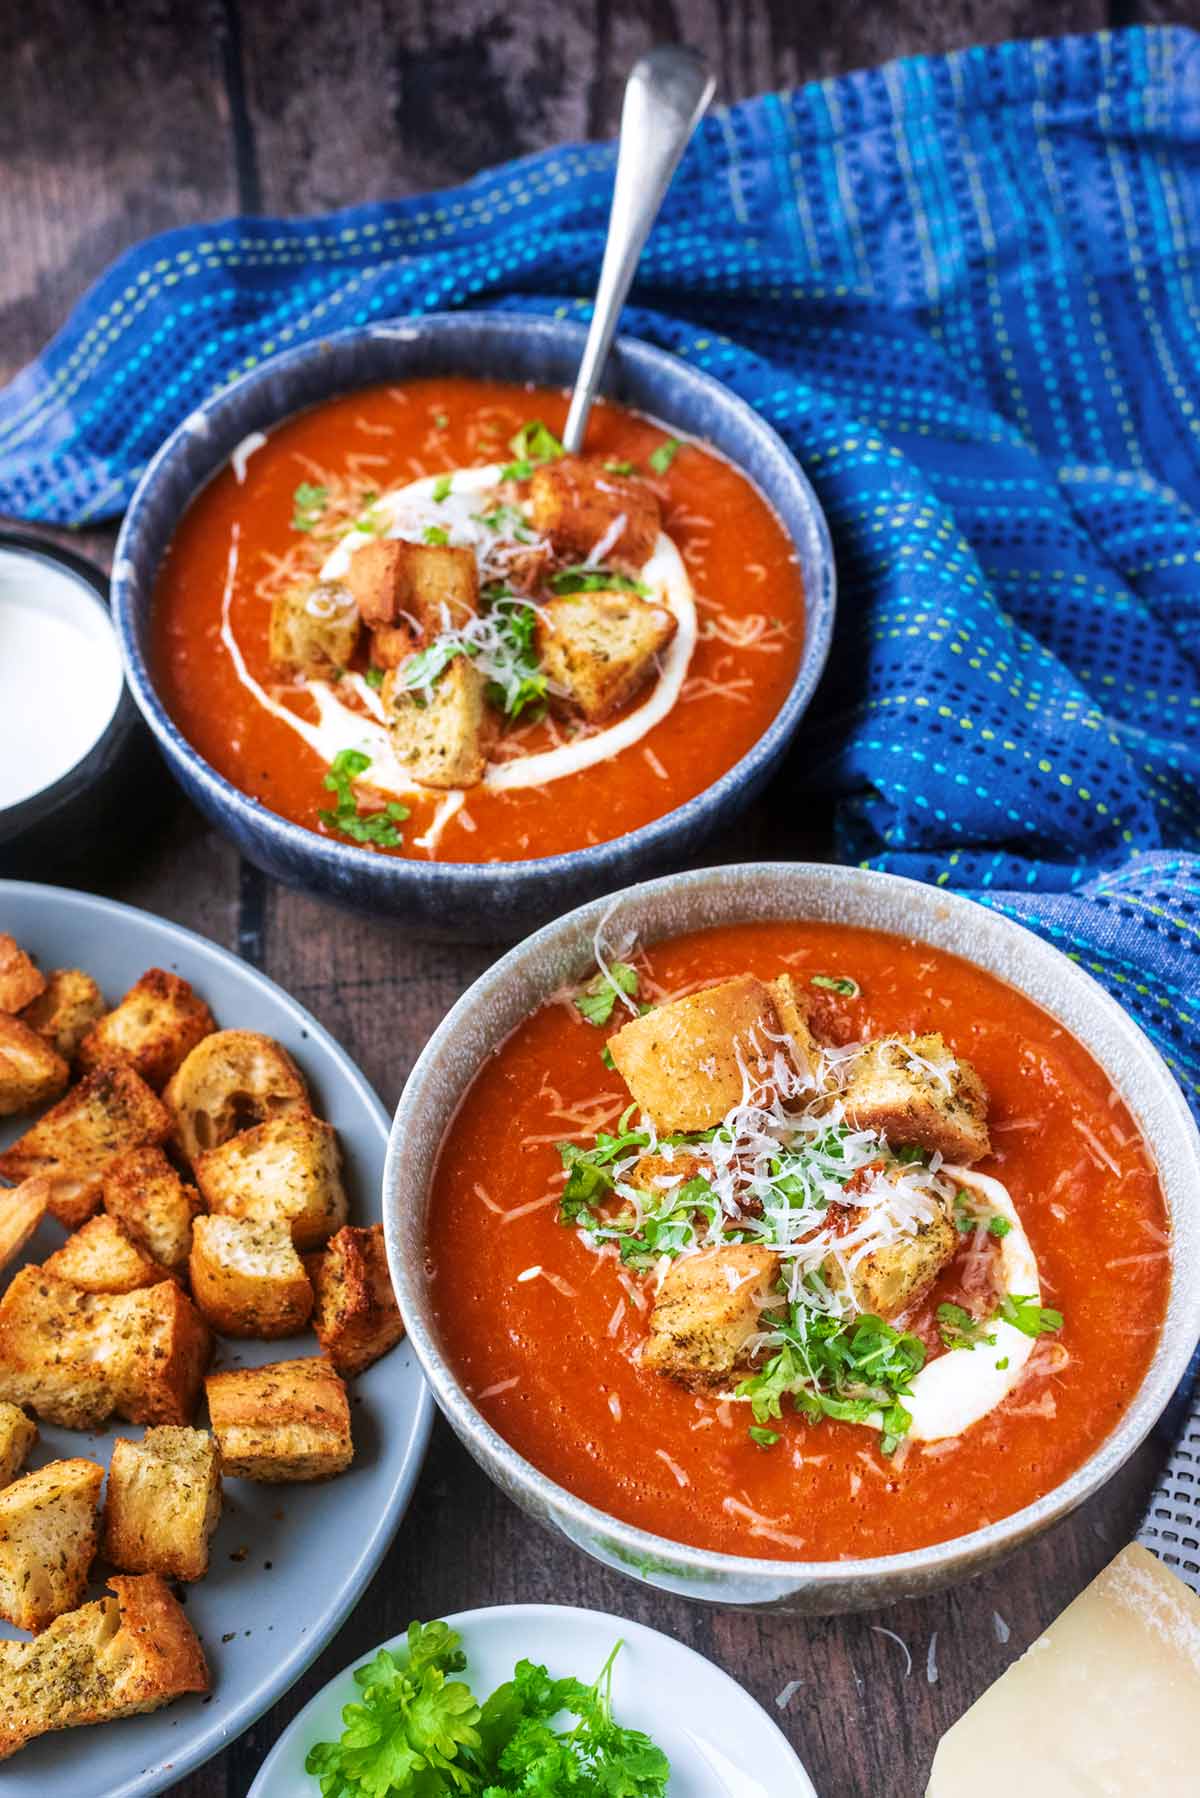 Two bowls of tomato soup in front of a blue towel.